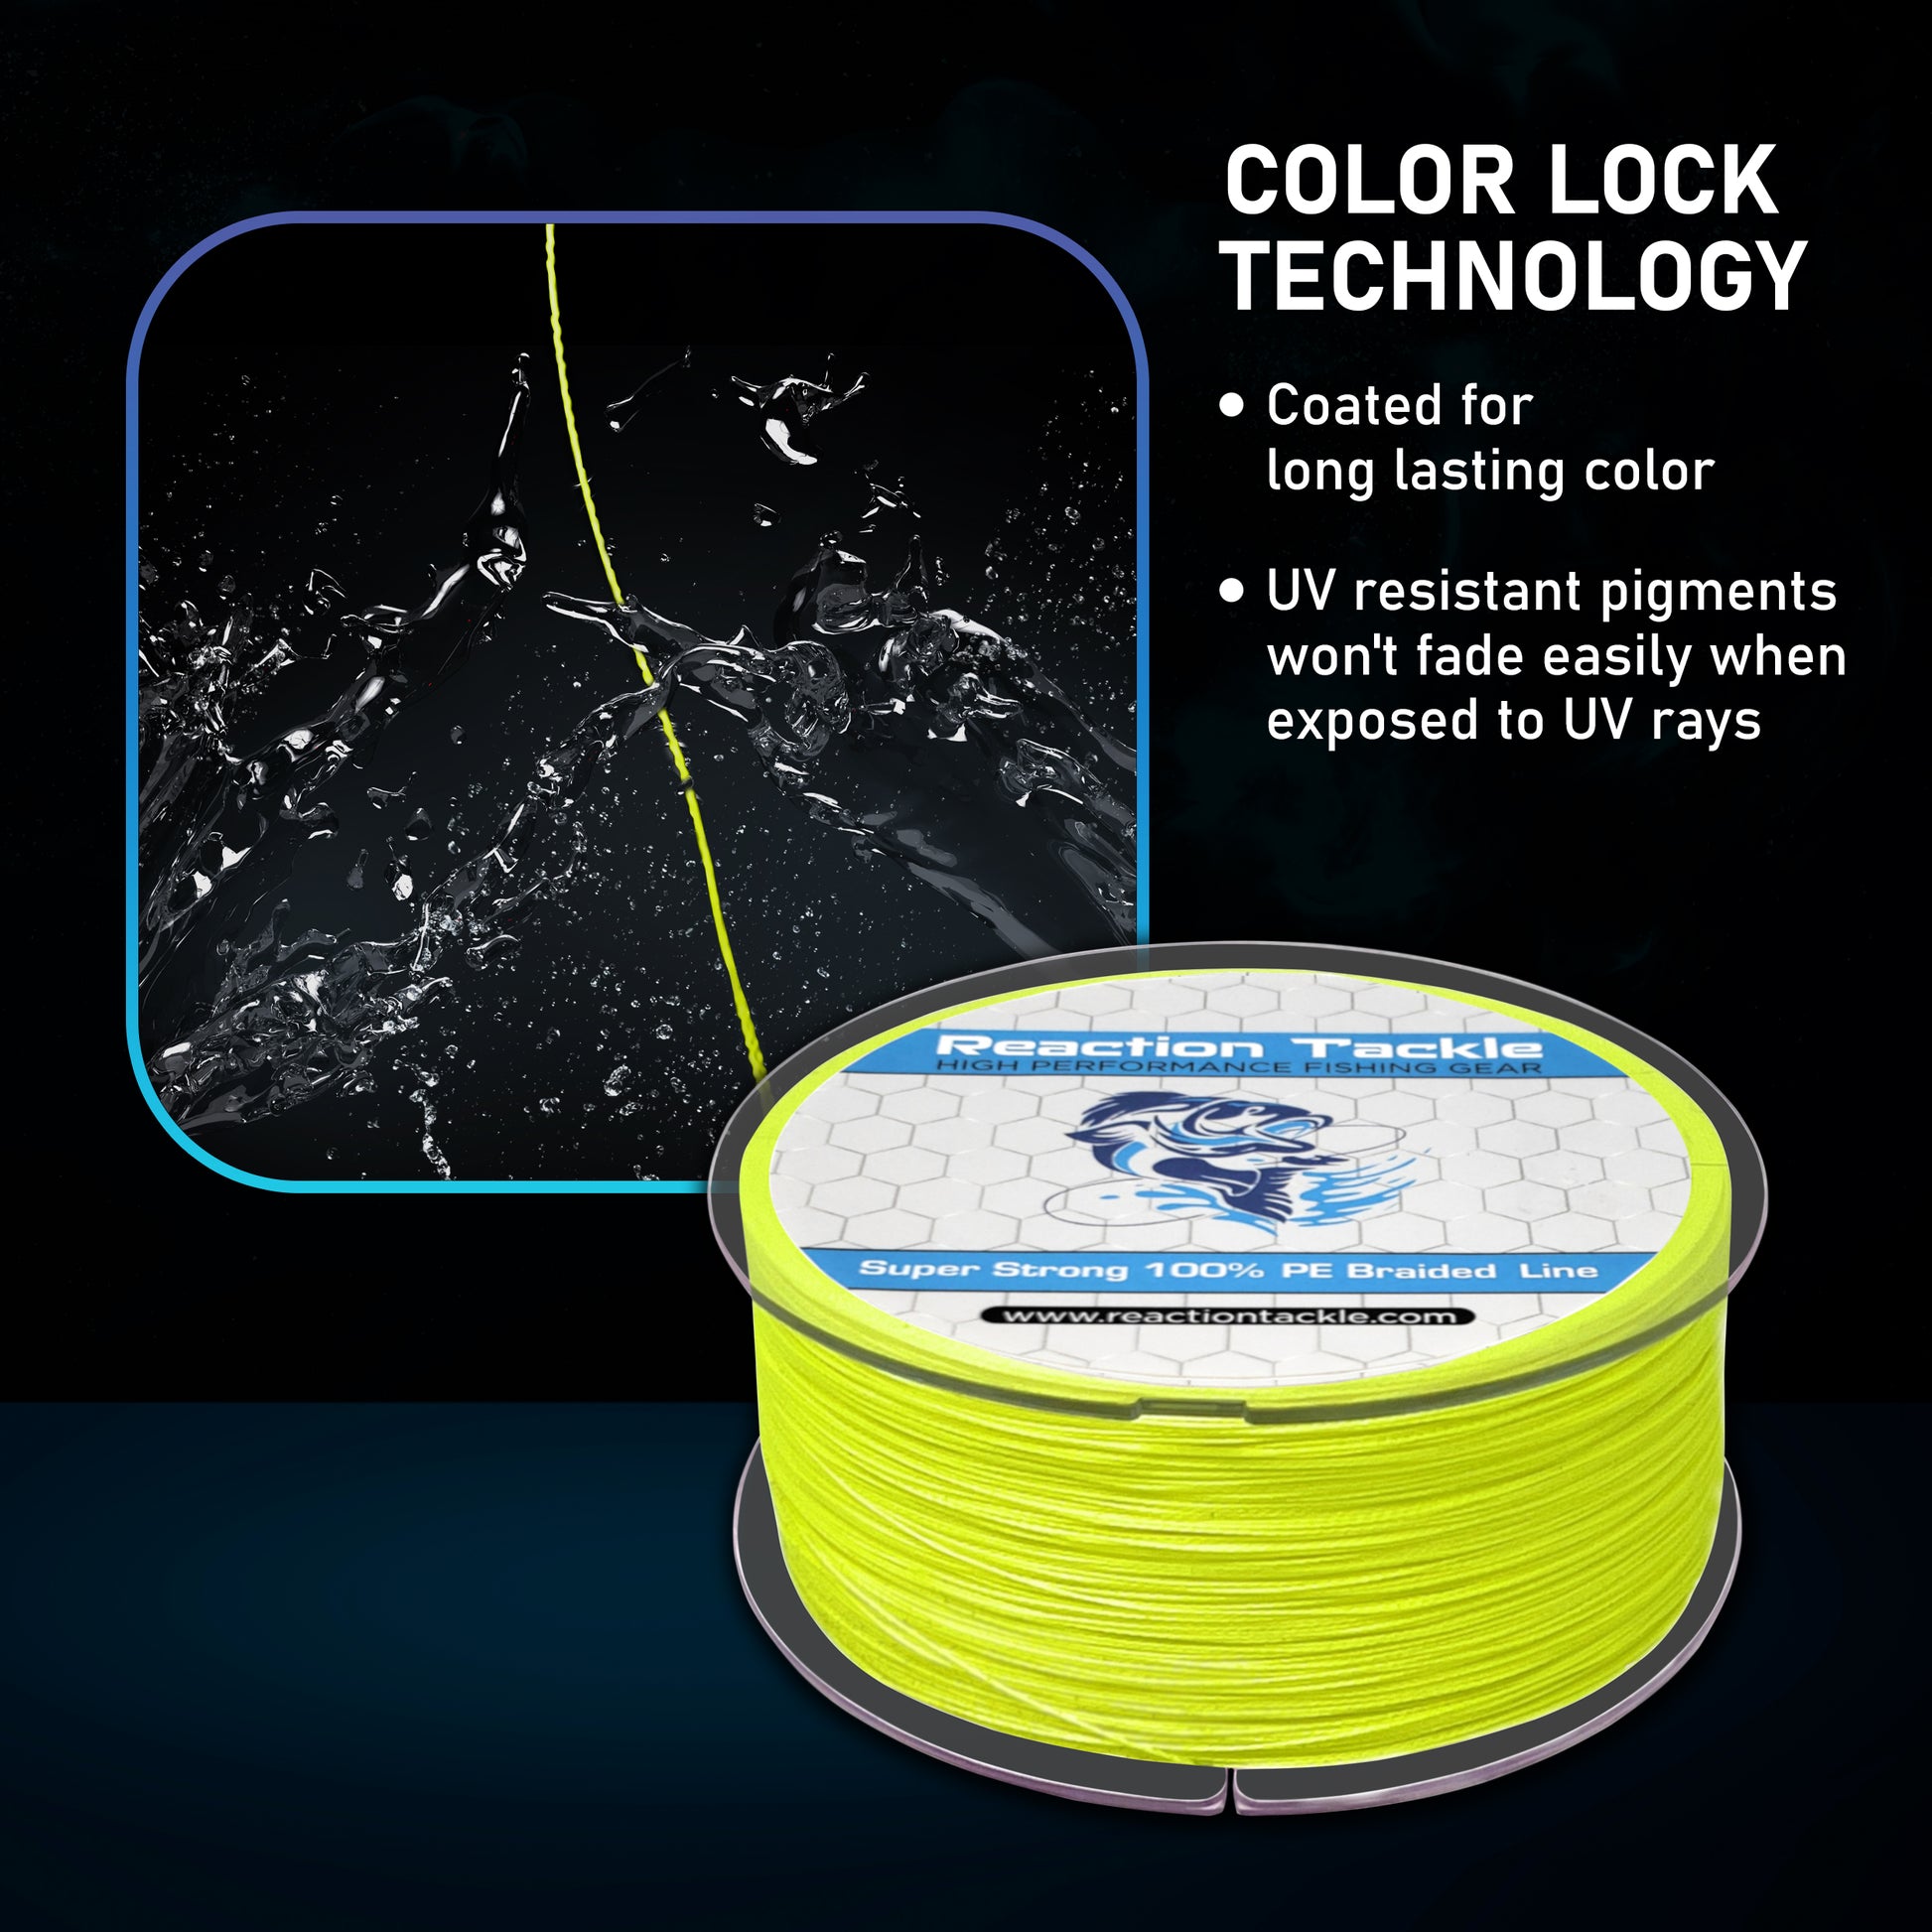  Braided Fishing Line NO Fade Red 80LB 300yds